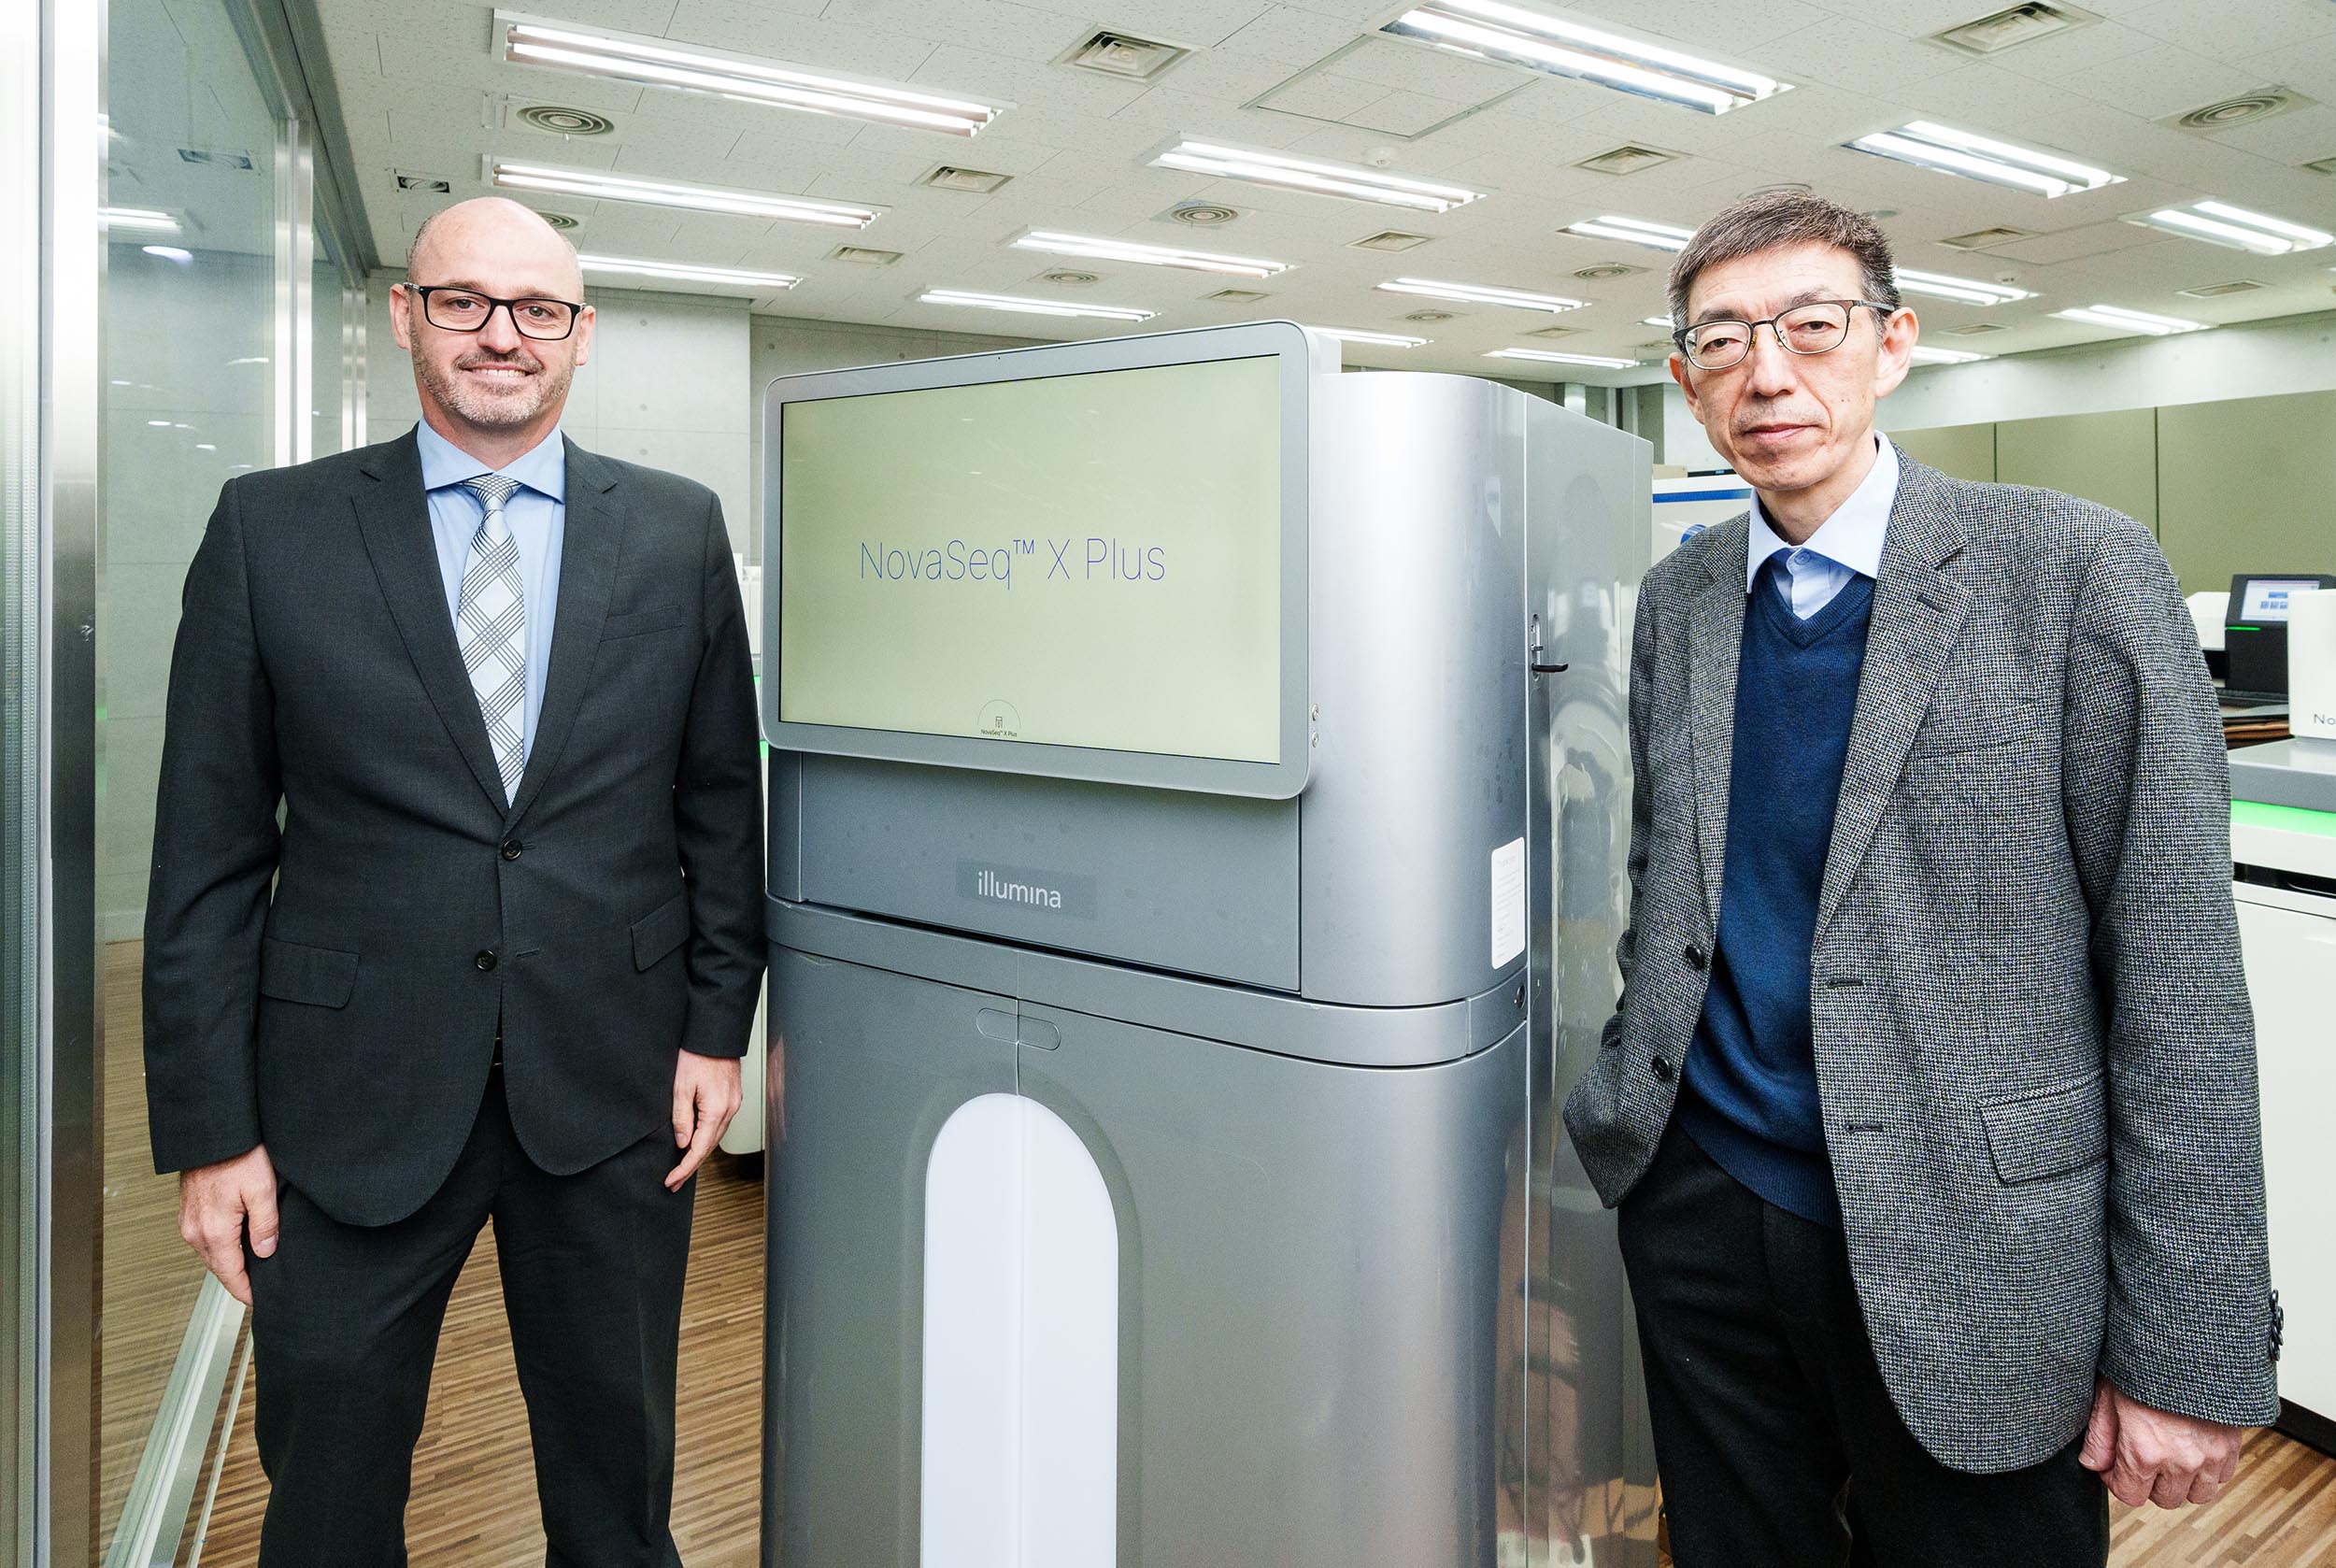 Macrogen becomes the first company to bring NovaSeq X Plus to Korea, marking its first introduction to the Asian region 